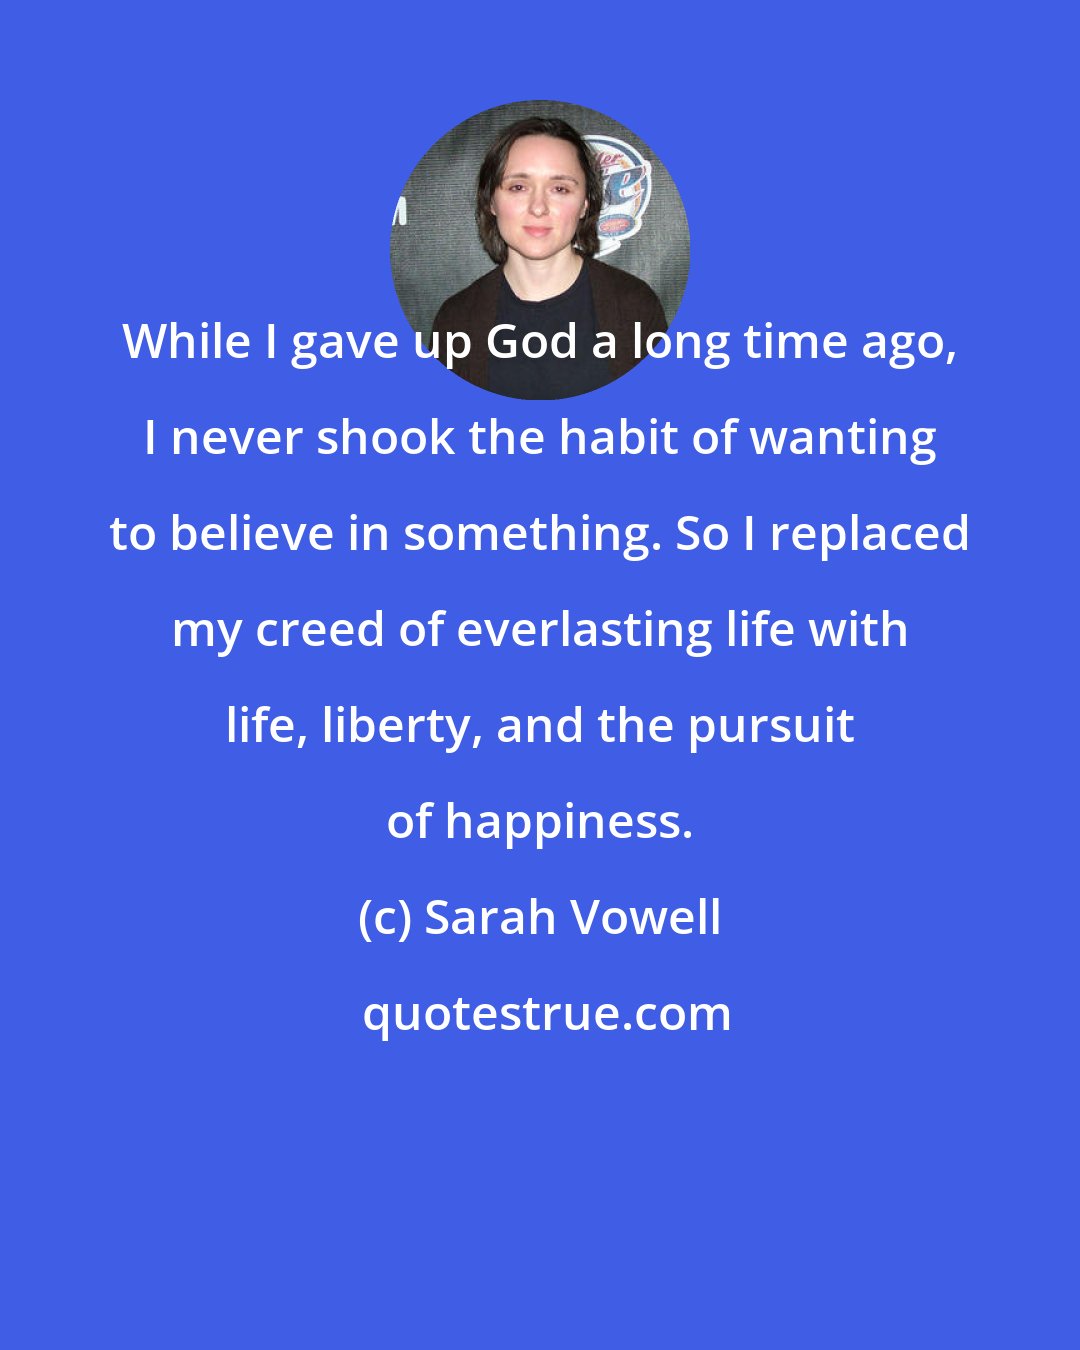 Sarah Vowell: While I gave up God a long time ago, I never shook the habit of wanting to believe in something. So I replaced my creed of everlasting life with life, liberty, and the pursuit of happiness.